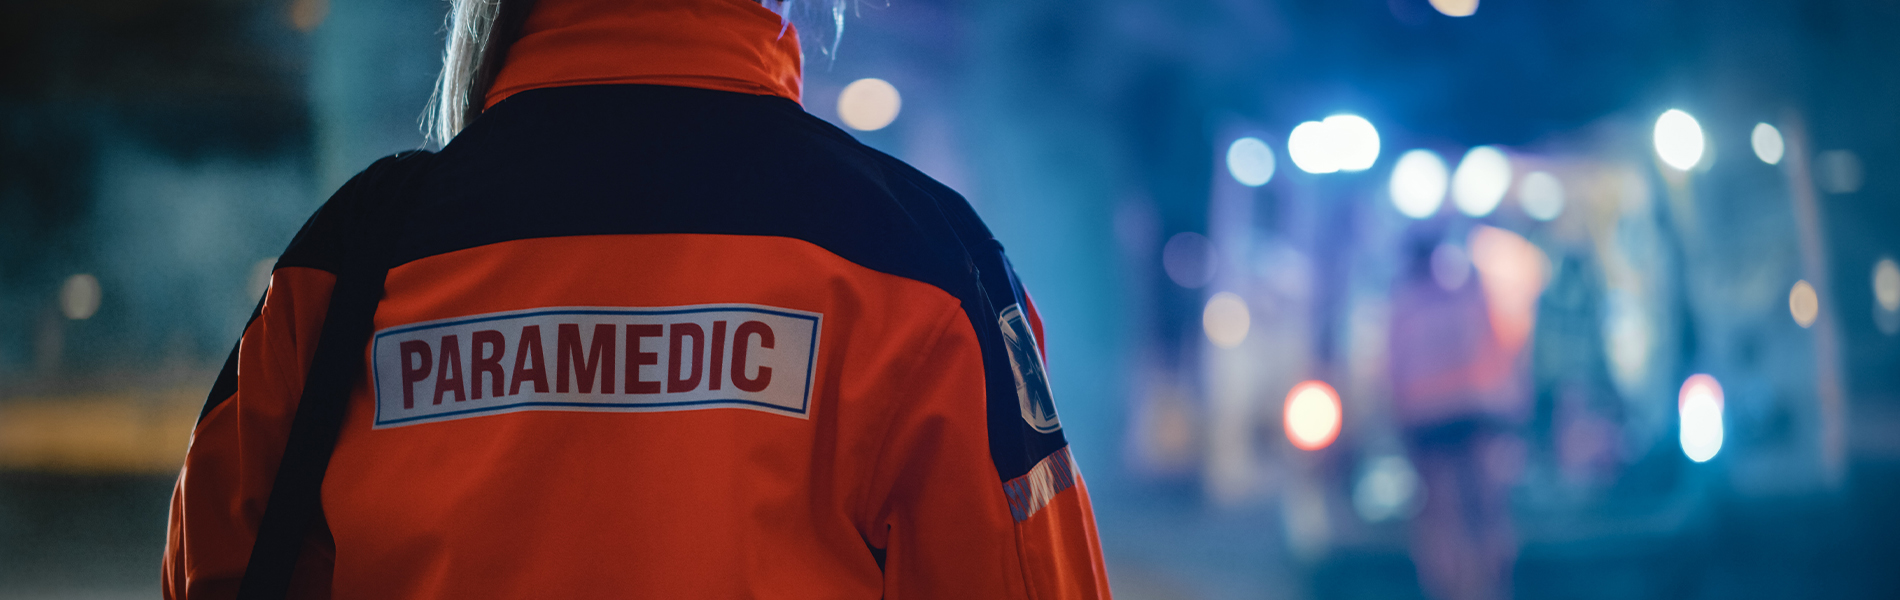 image of back of paramedic working on scene wearing a bright orange reflective jacket that says paramedic on the back. The head and lower part of the body are not visible and the background is blurred out